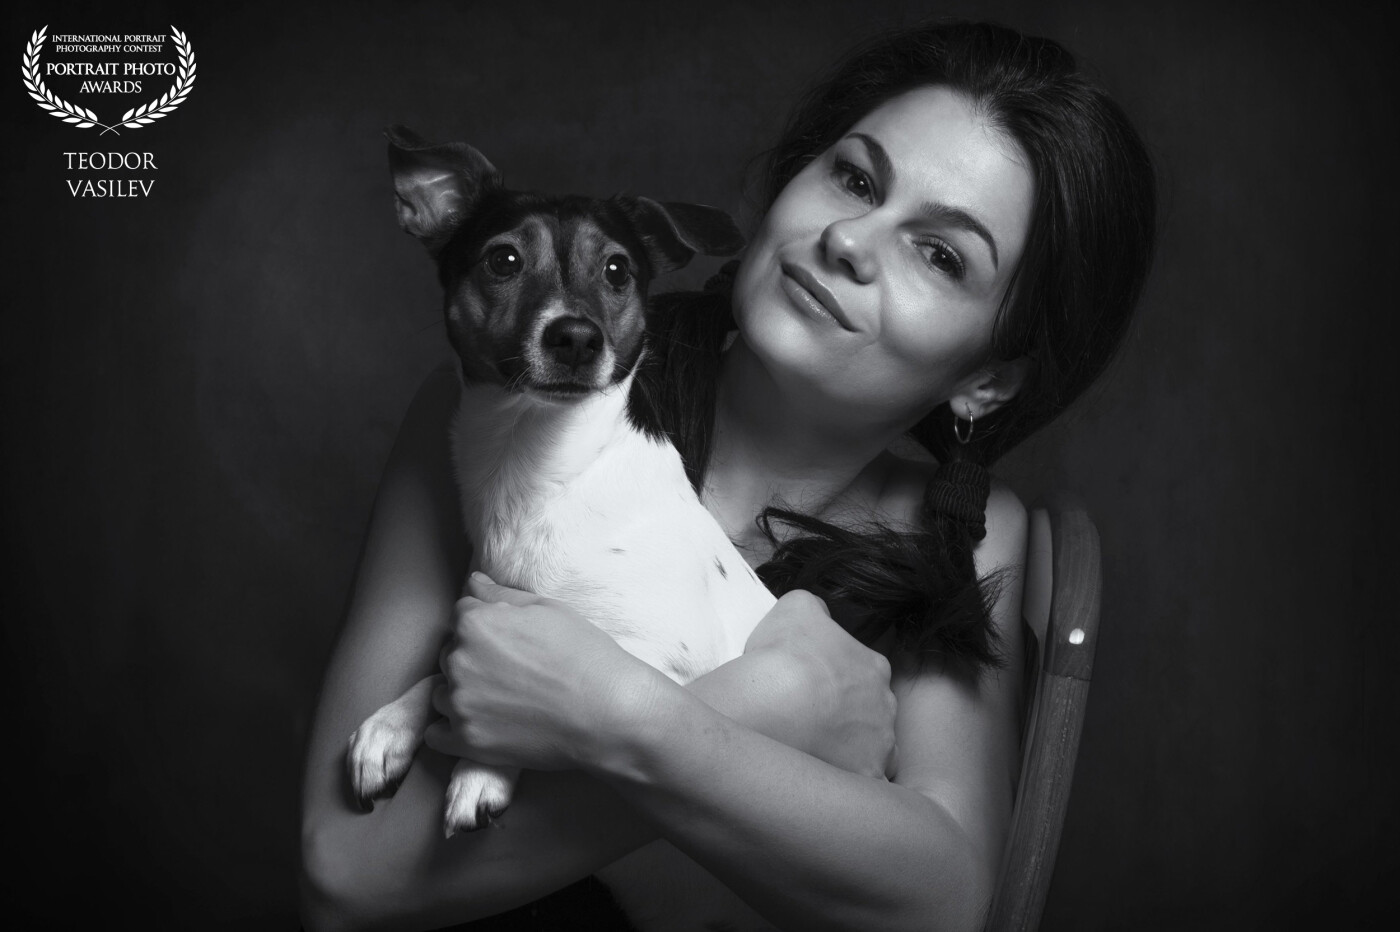 My wife and my dog are always my first models. The never let me down when it comes to taking some portraits for fun.